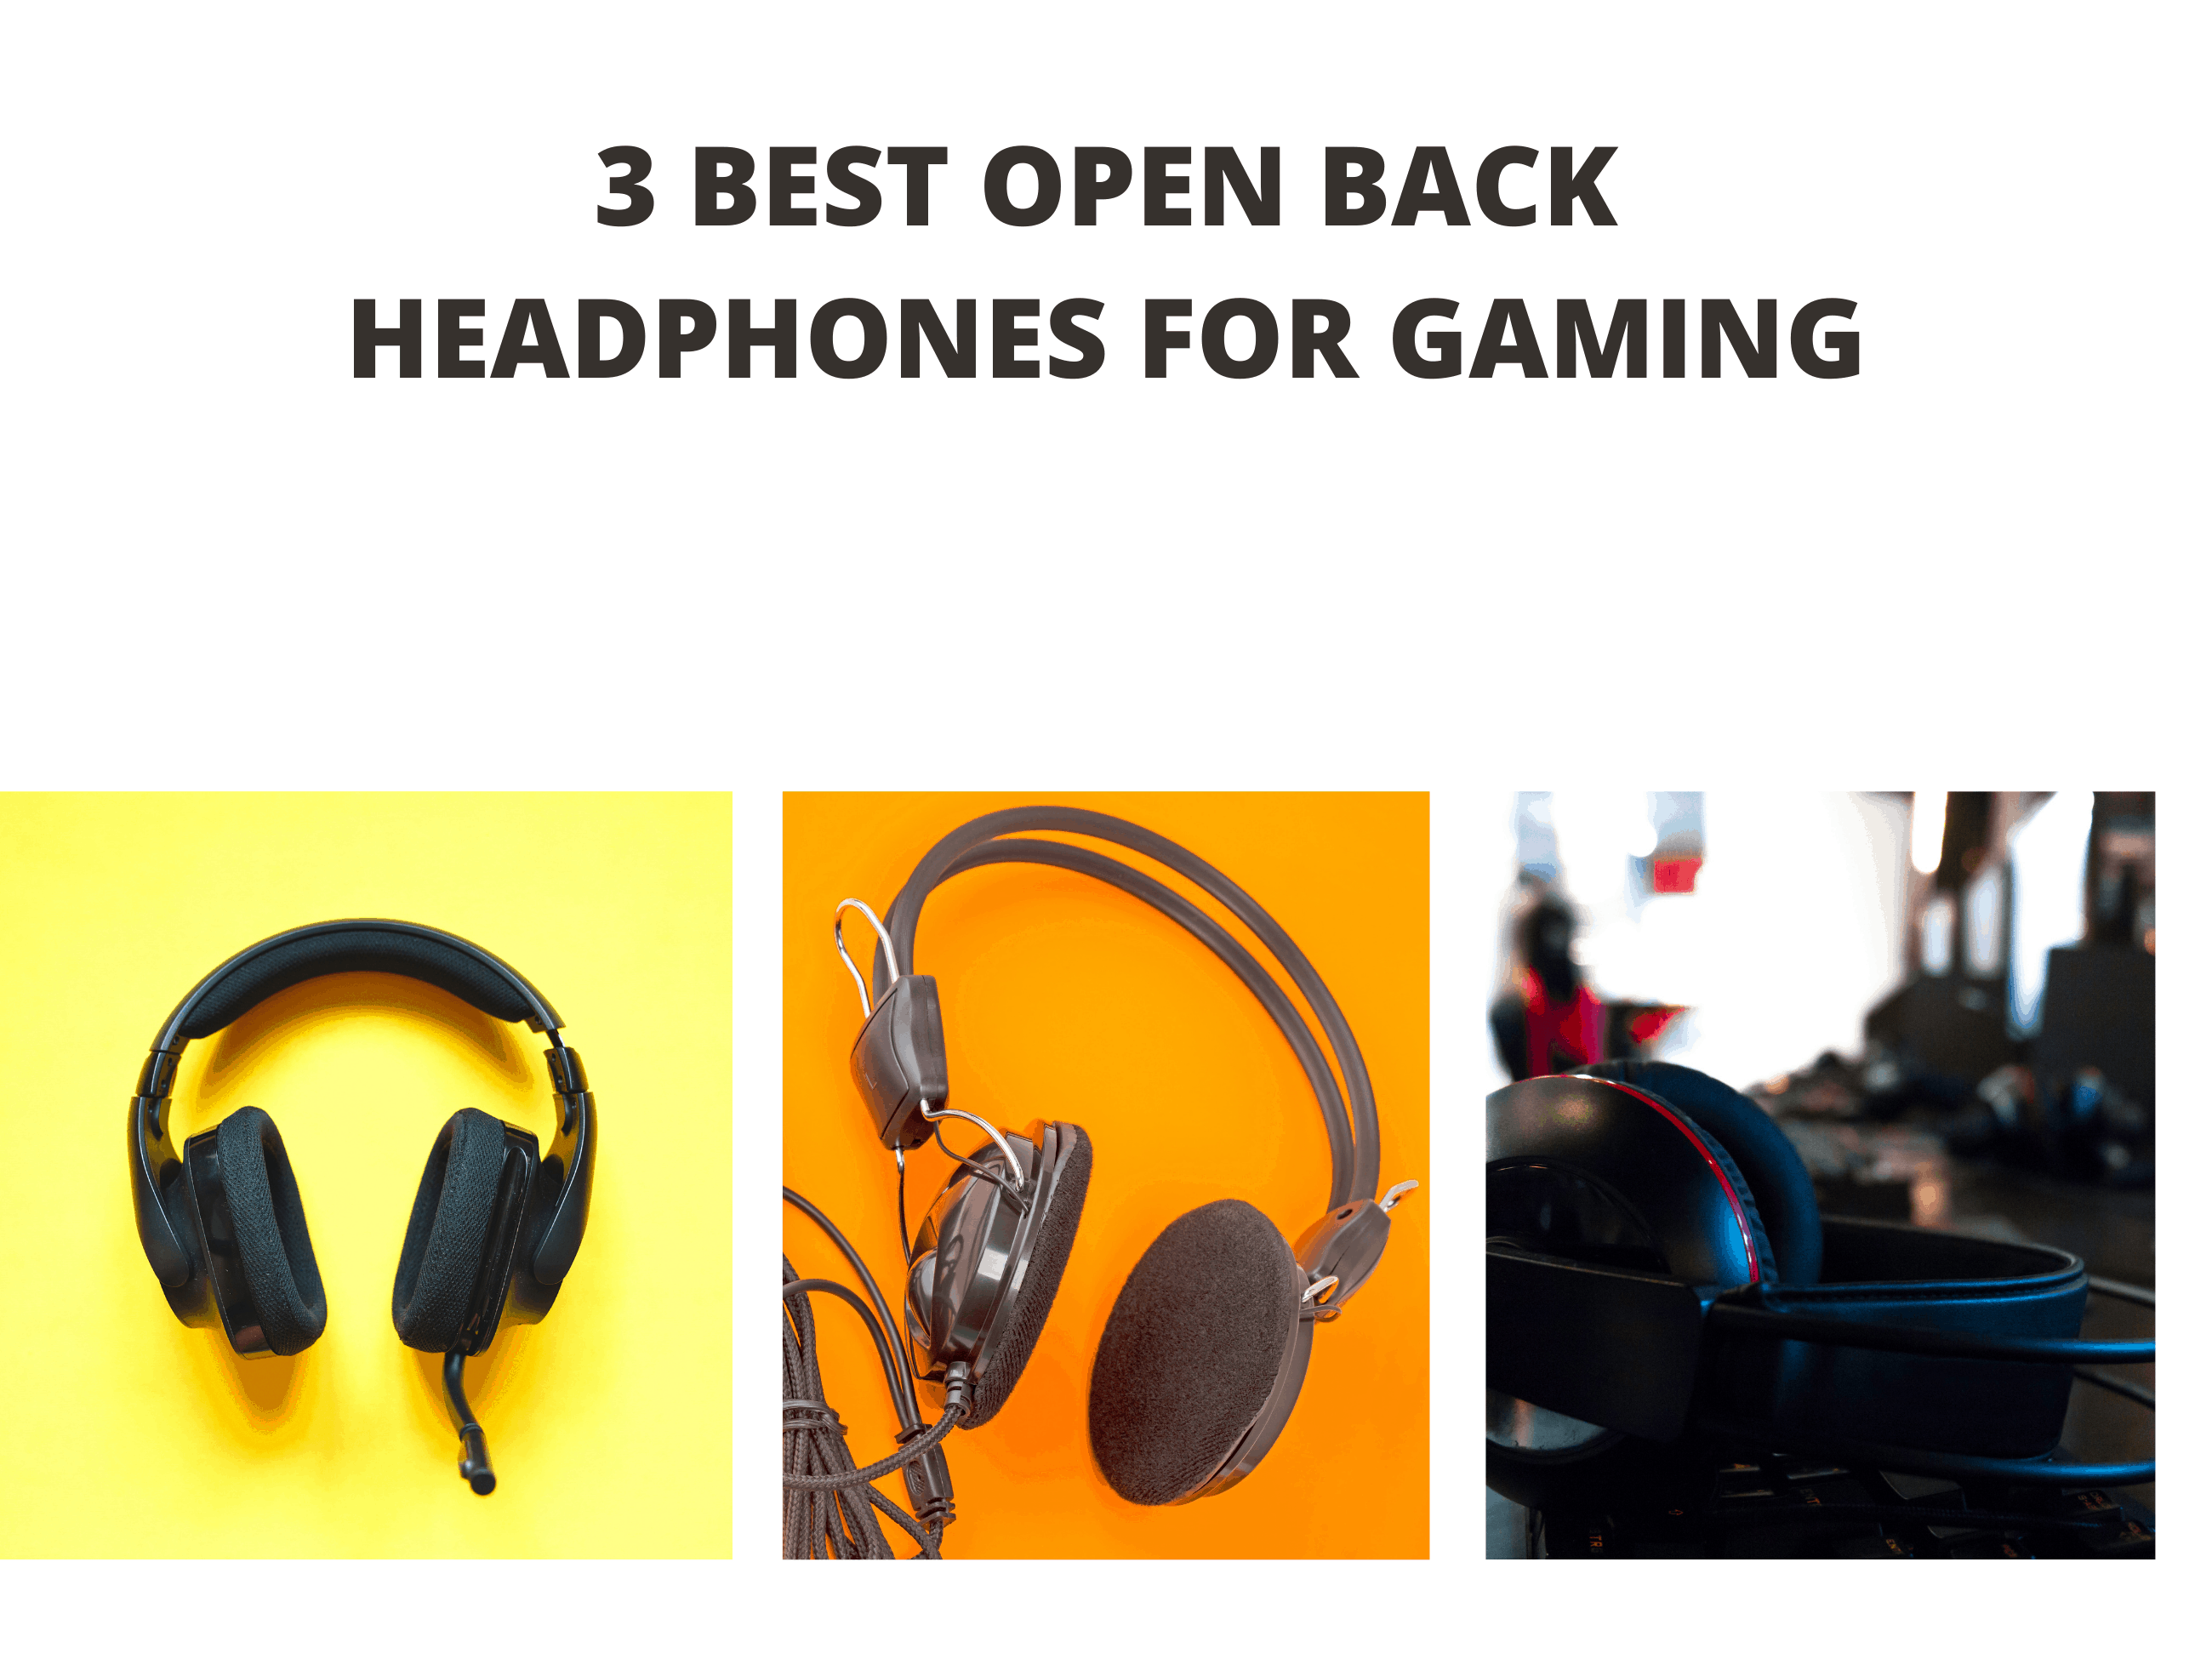 3 Best Open Back Headphones for Gaming (2022 Reviews)